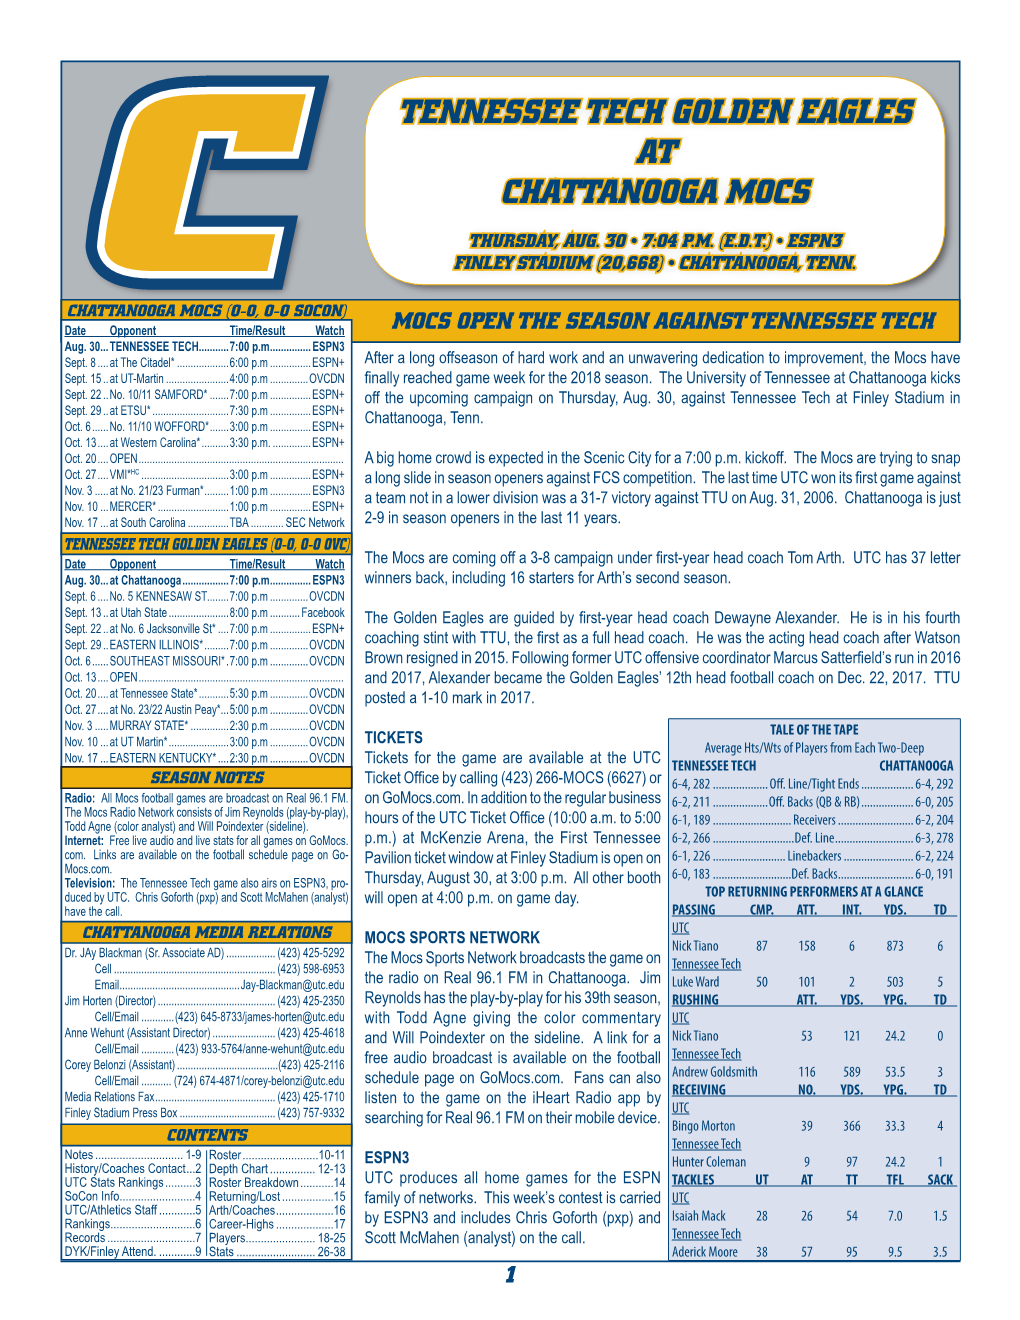 Tennessee Tech Golden Eagles at Chattanooga Mocs